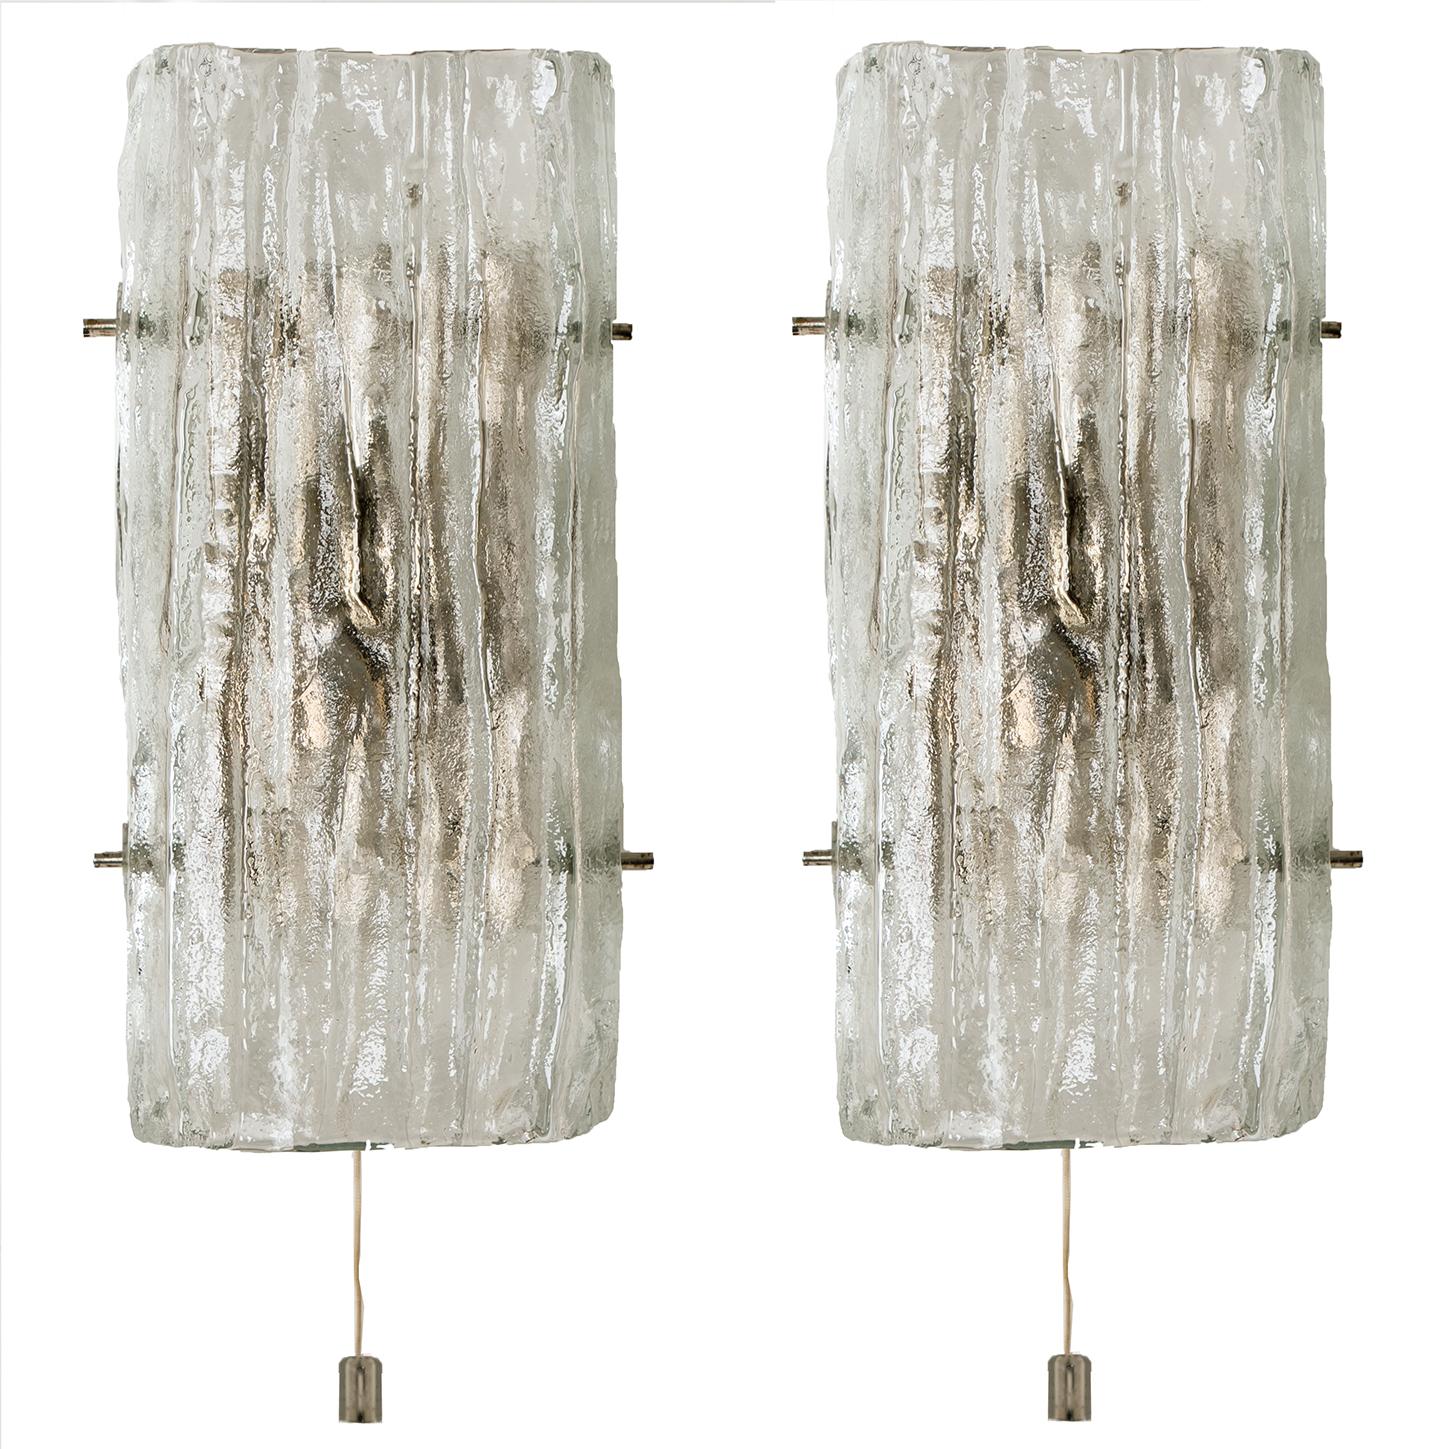 A set of two glass sconces model by Kalmar,Vienna Austria. Manufactured in circa 1970.They are made of a silver painted metal backplate which holds a textured and frosted glass lampshade.

The sconces have a pull-string (on and off) on the bottom